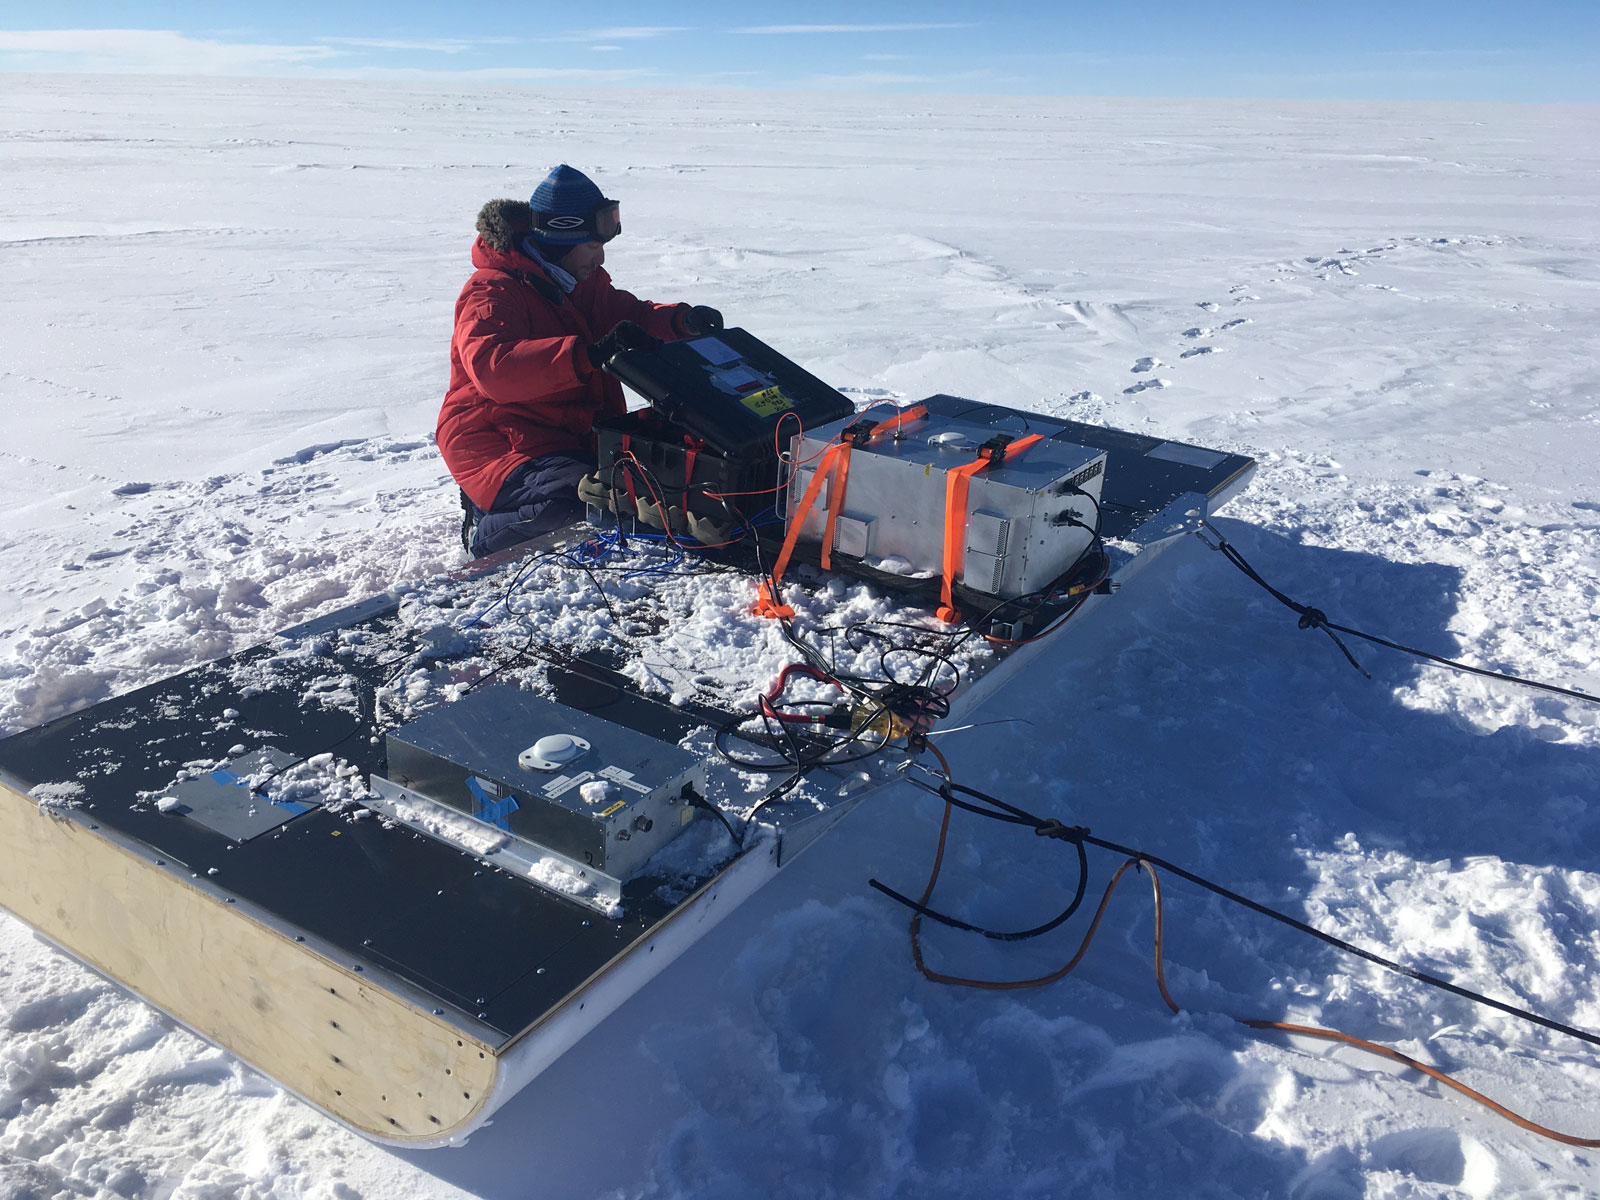 Professor Holschuh loads scientific equipment onto a sled on the snow in Antarctica